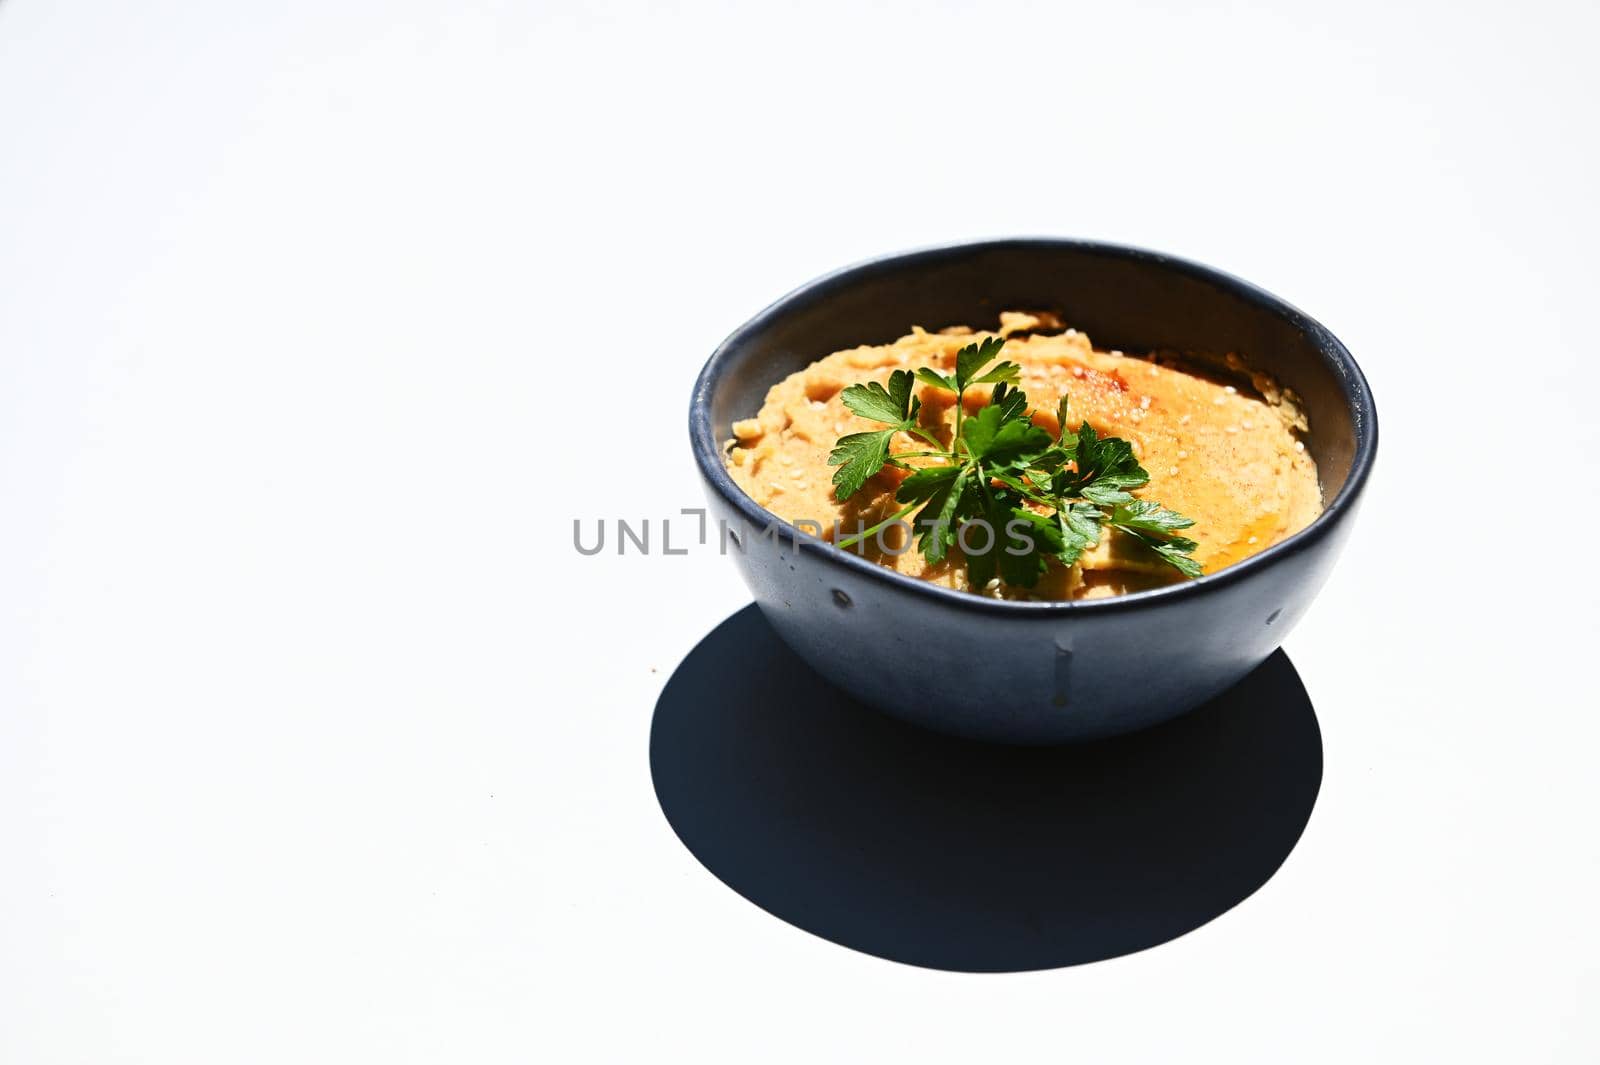 Close-up with green parsley and a bowl with topped chickpea hummus, sparkled with paprika, isolated over white background with copy space for advertising text